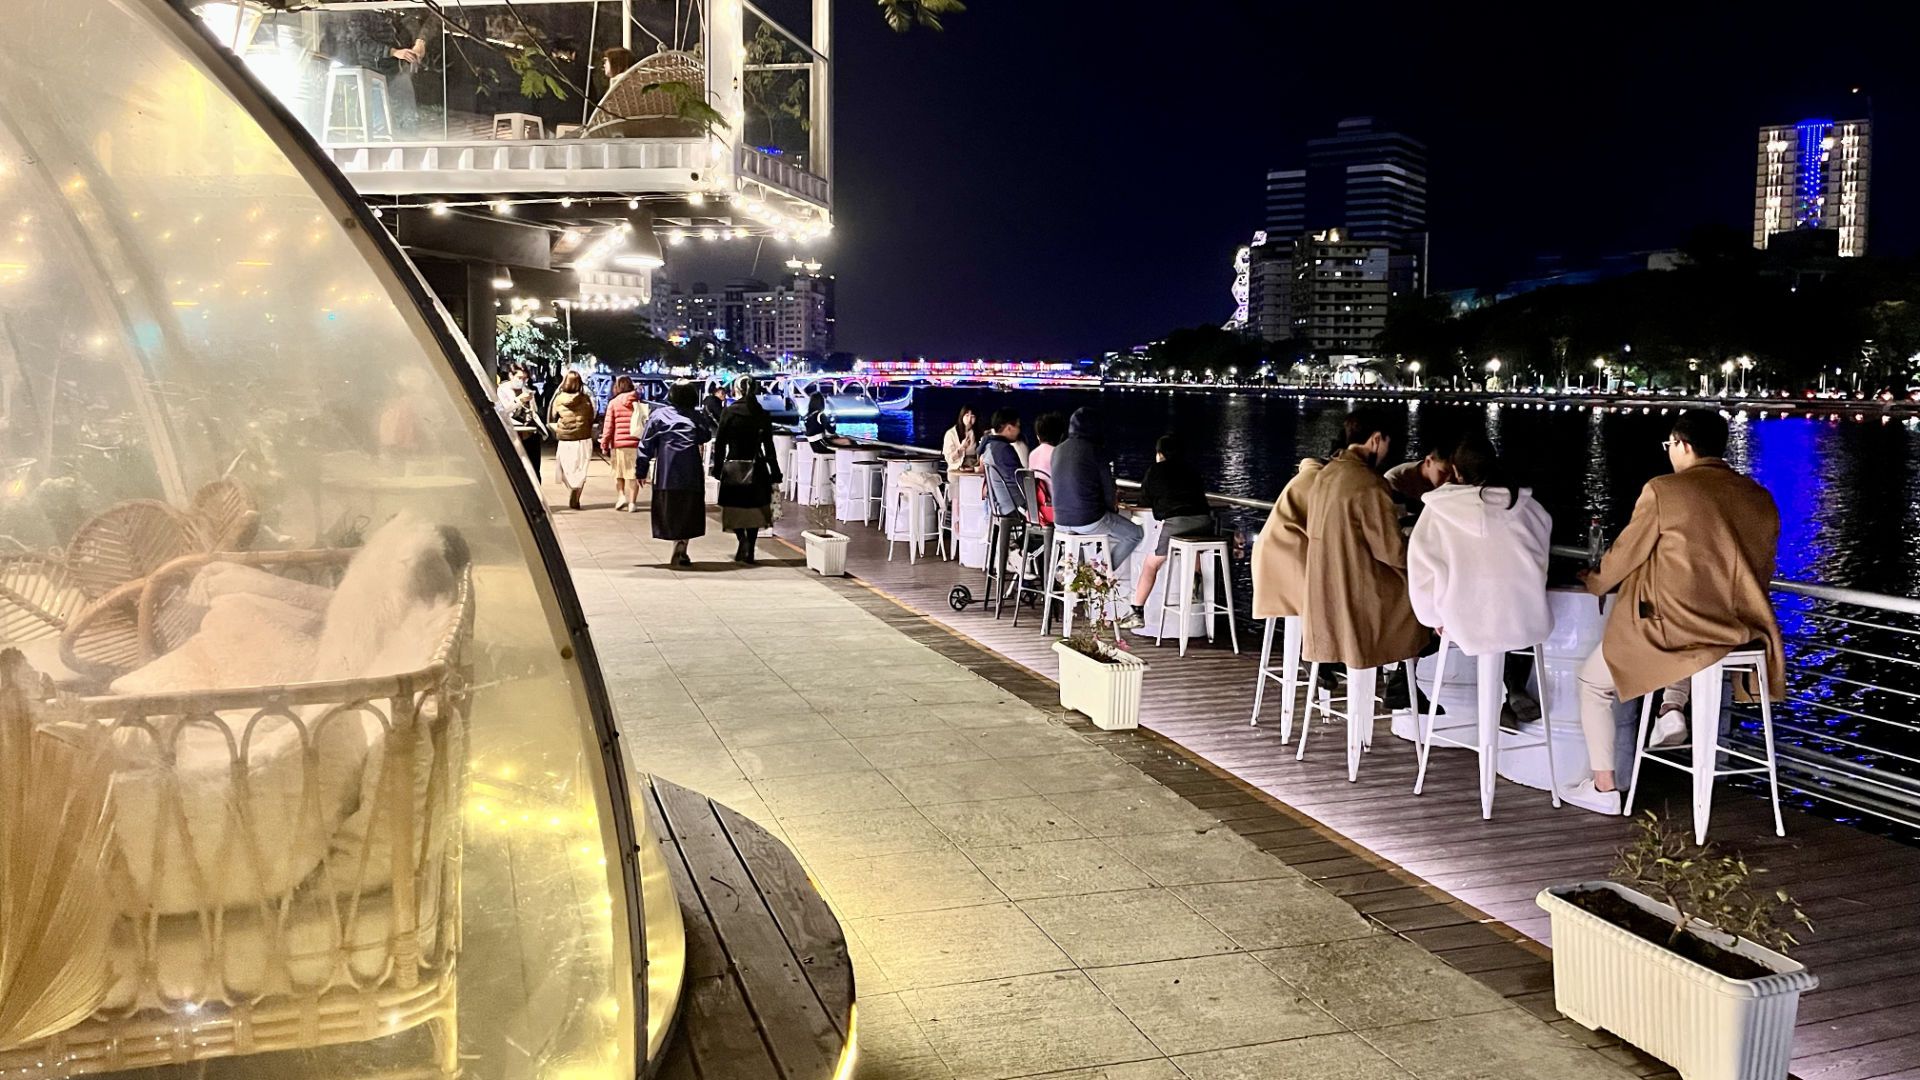 Diners at a bar next to Love River. In the foreground is a spherical room made of transparent plastic, with tropical furniture inside. Above the path is a glass and metal cube-shaped room. Others are sitting on barstools outside, next to the river.